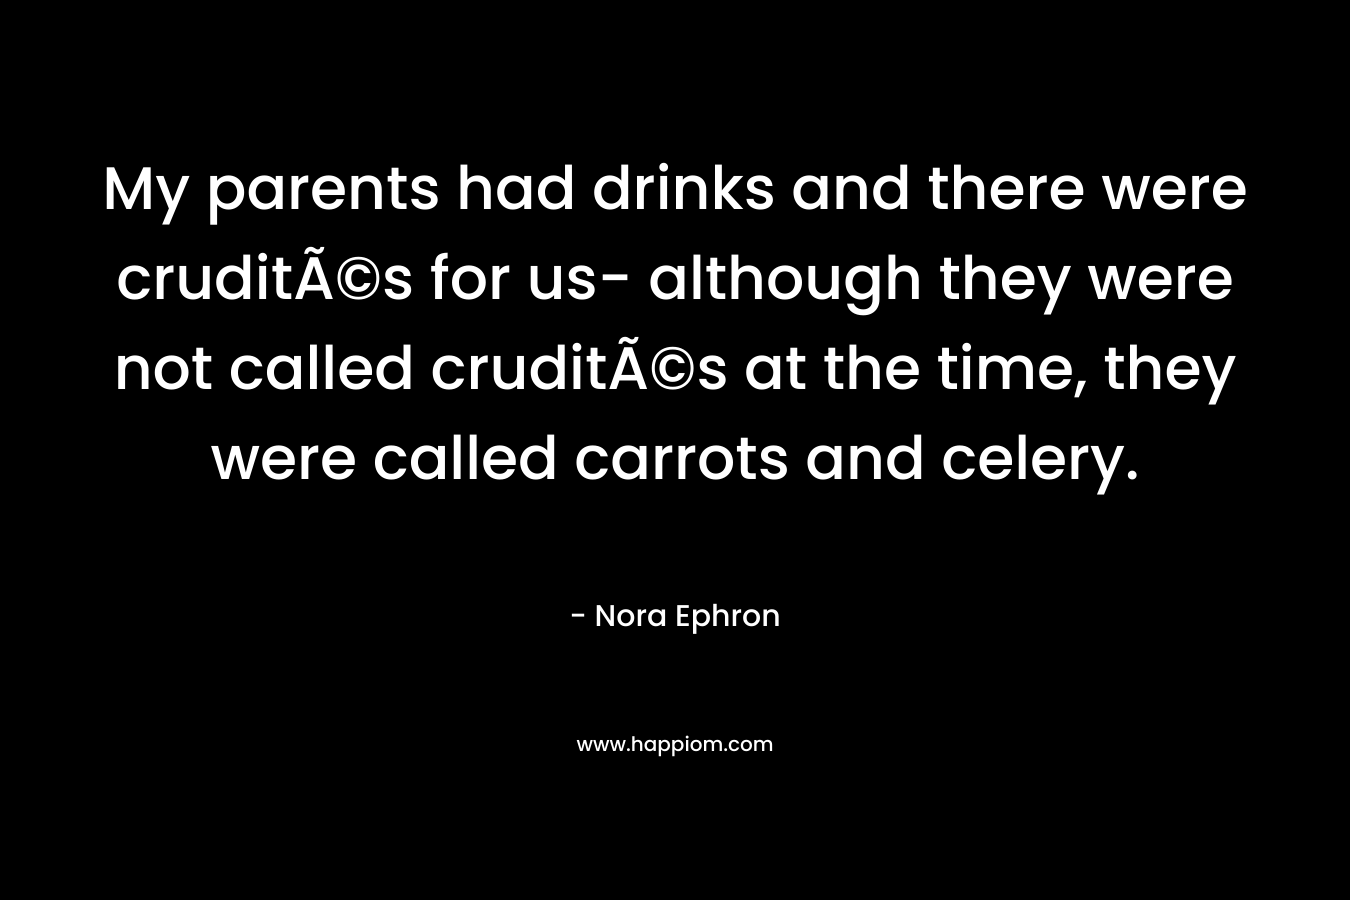 My parents had drinks and there were cruditÃ©s for us- although they were not called cruditÃ©s at the time, they were called carrots and celery. – Nora Ephron